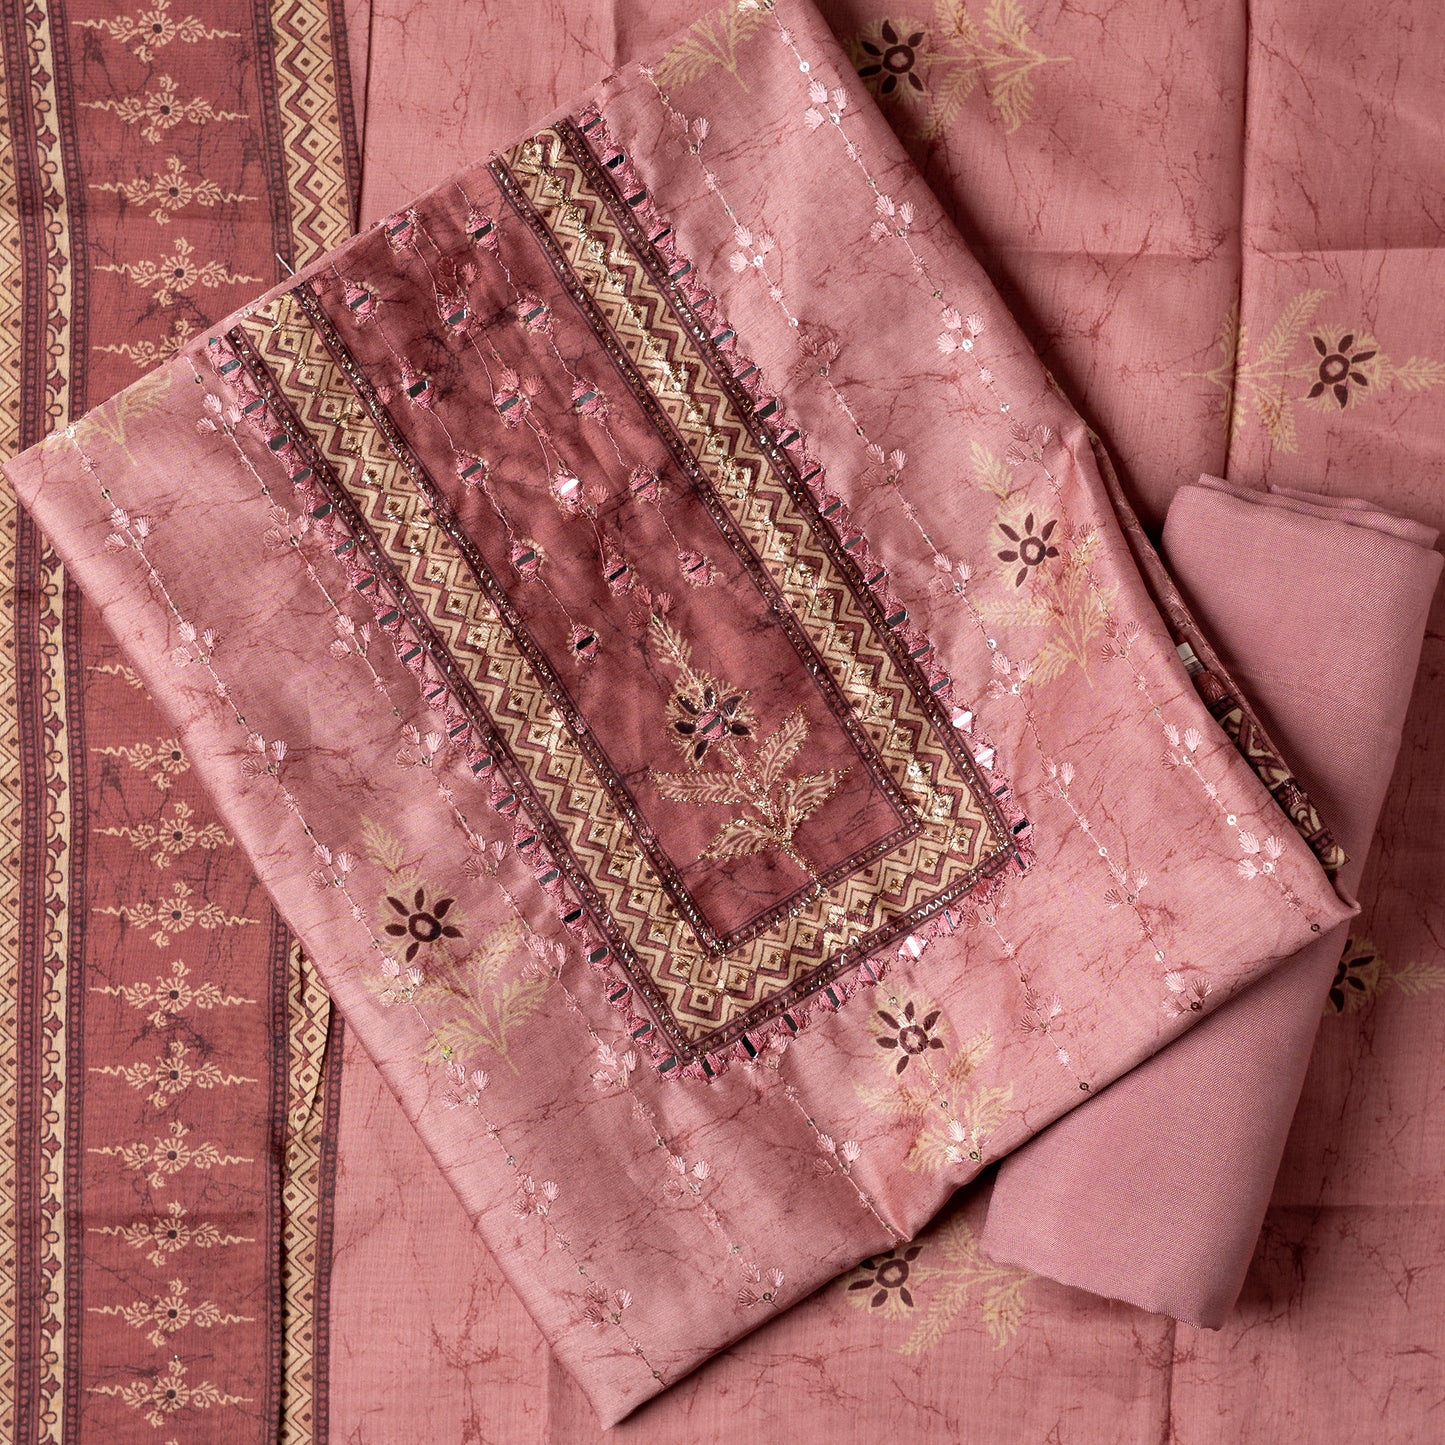 Chanderi silk dress material with print design, embroidery work, thread work and sequins work. It has zari and mirror work in neck area also. Silk dupatta with beautiful digital prints matching the top color. Cotton silk bottom same Light Wine color as the top and dupatta. 